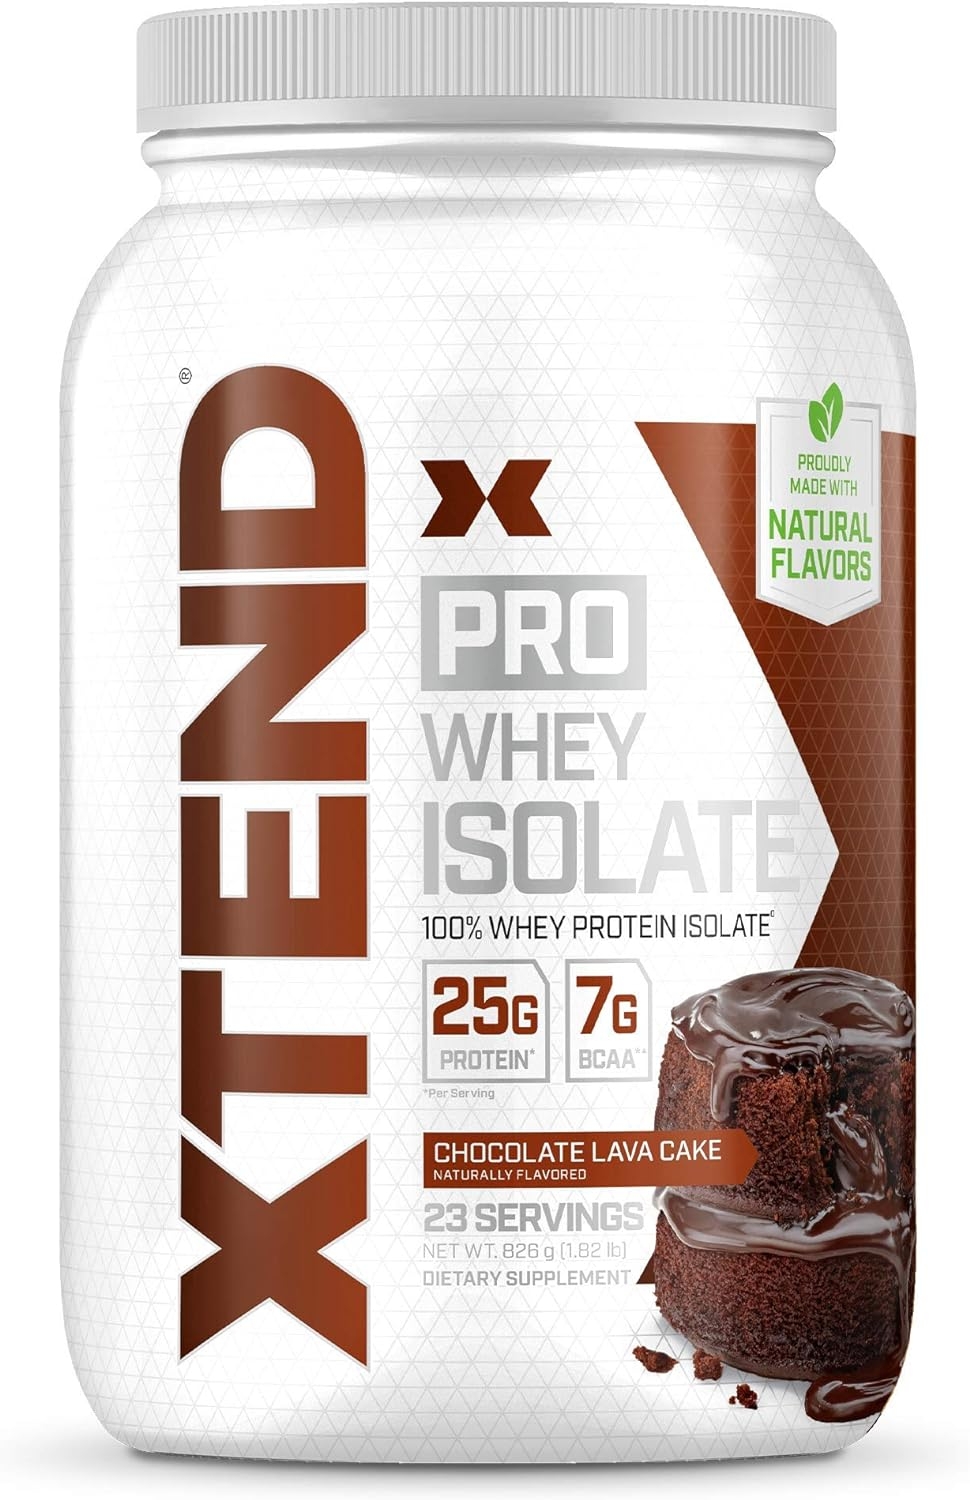 XTEND Pro Protein Powder Chocolate Lava Cake | 100% Whey Protein Isolate | Keto Friendly + 7g BCAAs with Natural Flavors | Gluten Free Low Fat Post Workout Drink | 1.8lbs